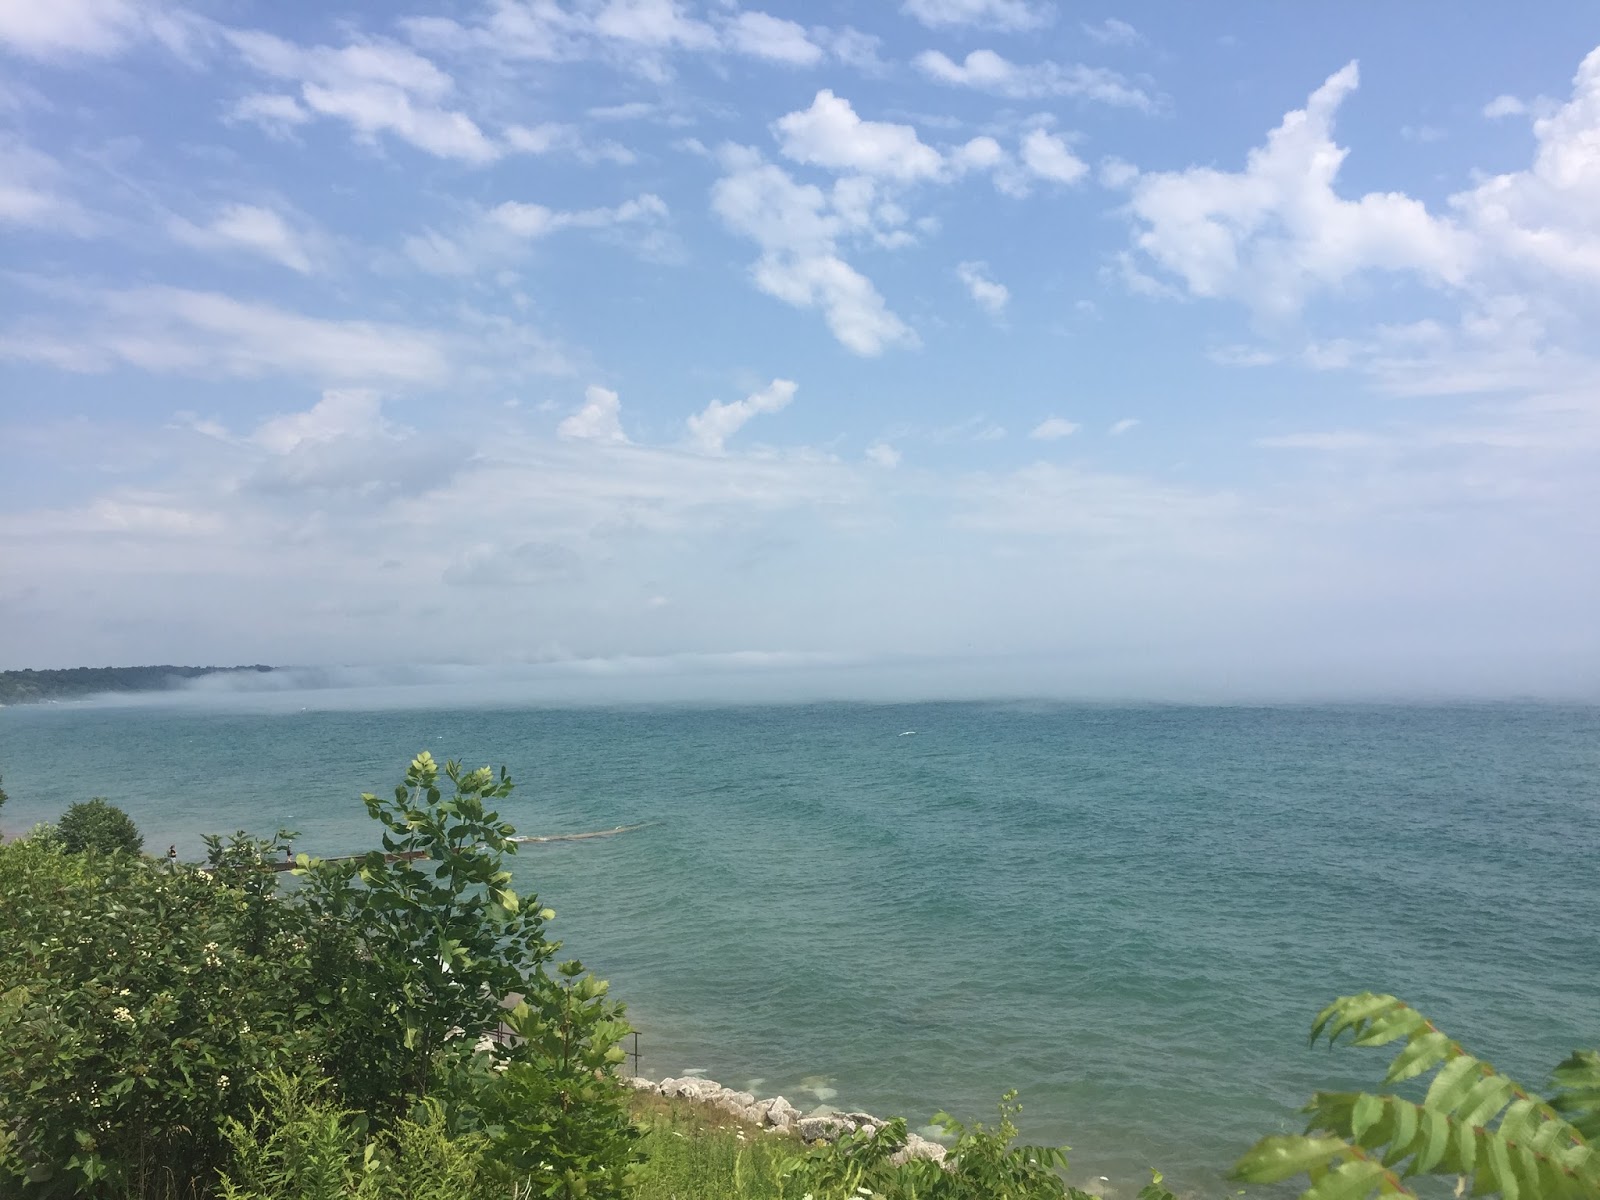 Milwaukee Area Parks: It's Cooler Near the Lake